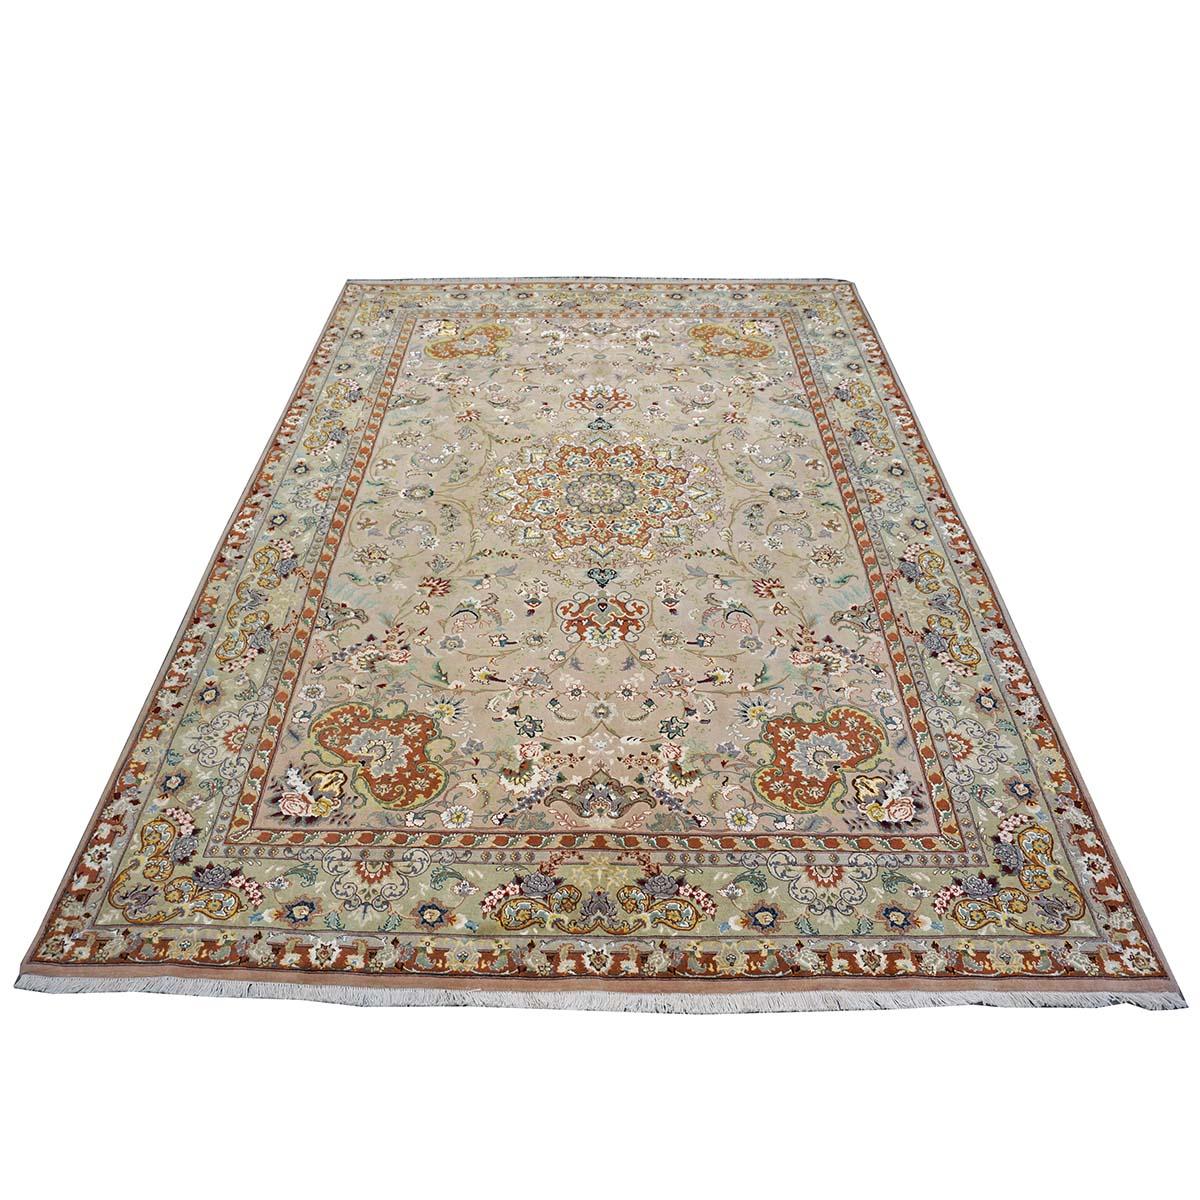 Ashly fine Rugs presents a 2000s Vintage Persian Tabriz Wool & Silk. Tabriz is a northern city in modern-day Iran and has forever been famous for the fineness and craftsmanship of its handmade rugs. This piece has a wonderful light mauve background